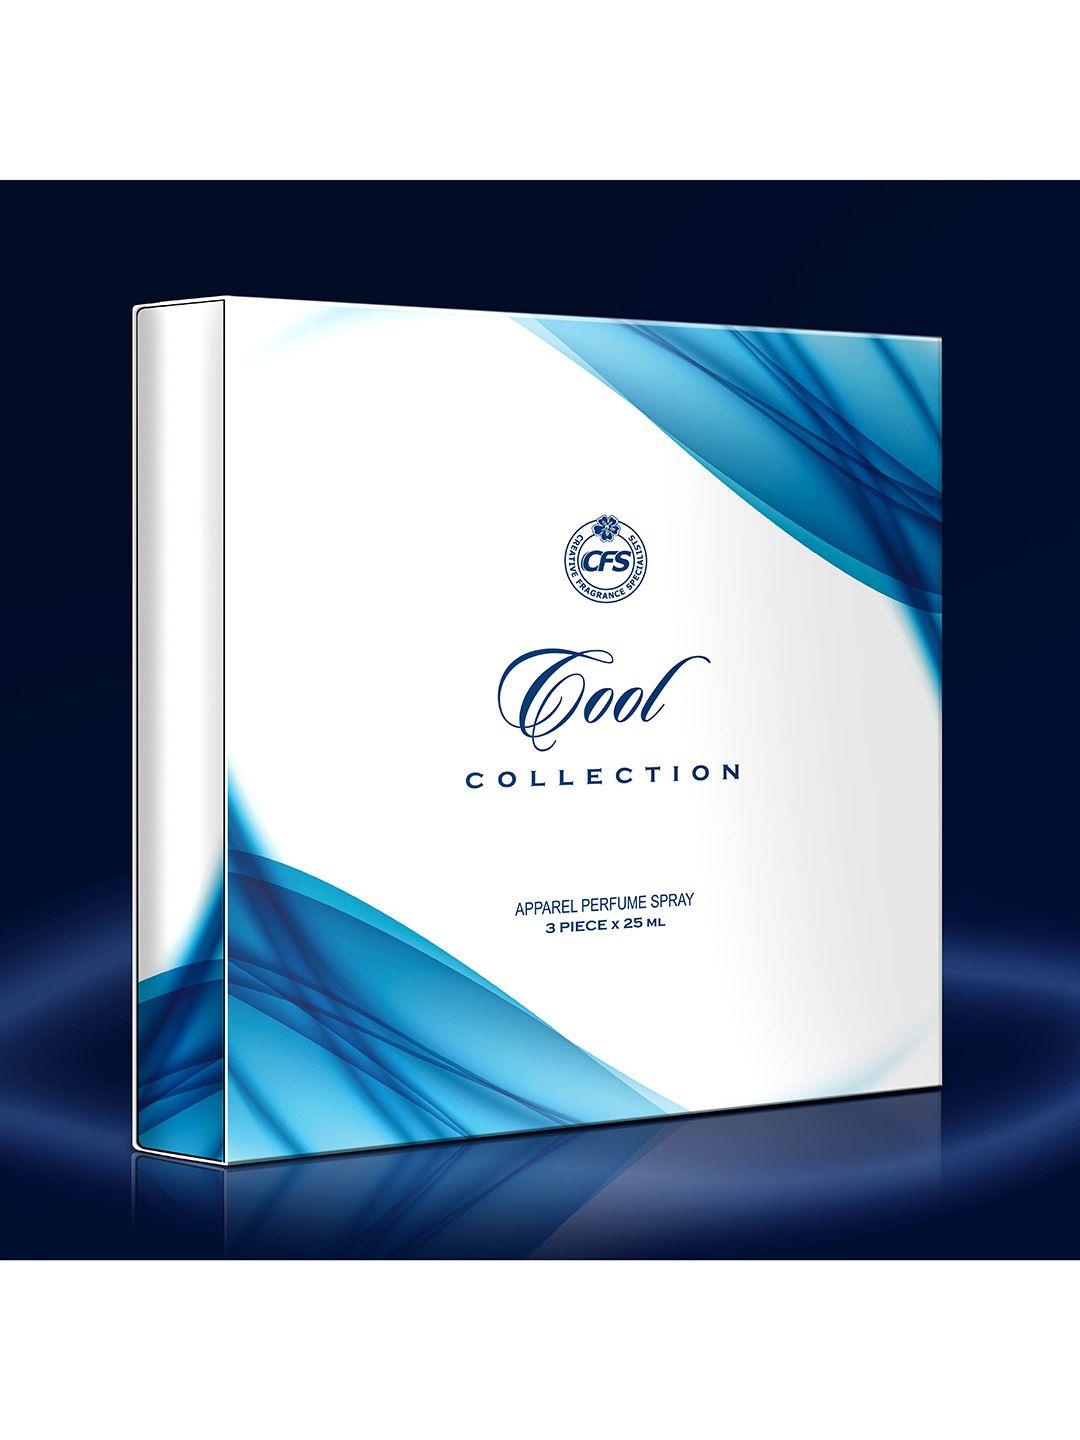 cfs cool collection perfume set - begin blue + cargo white + 21 club ice water - 25ml each